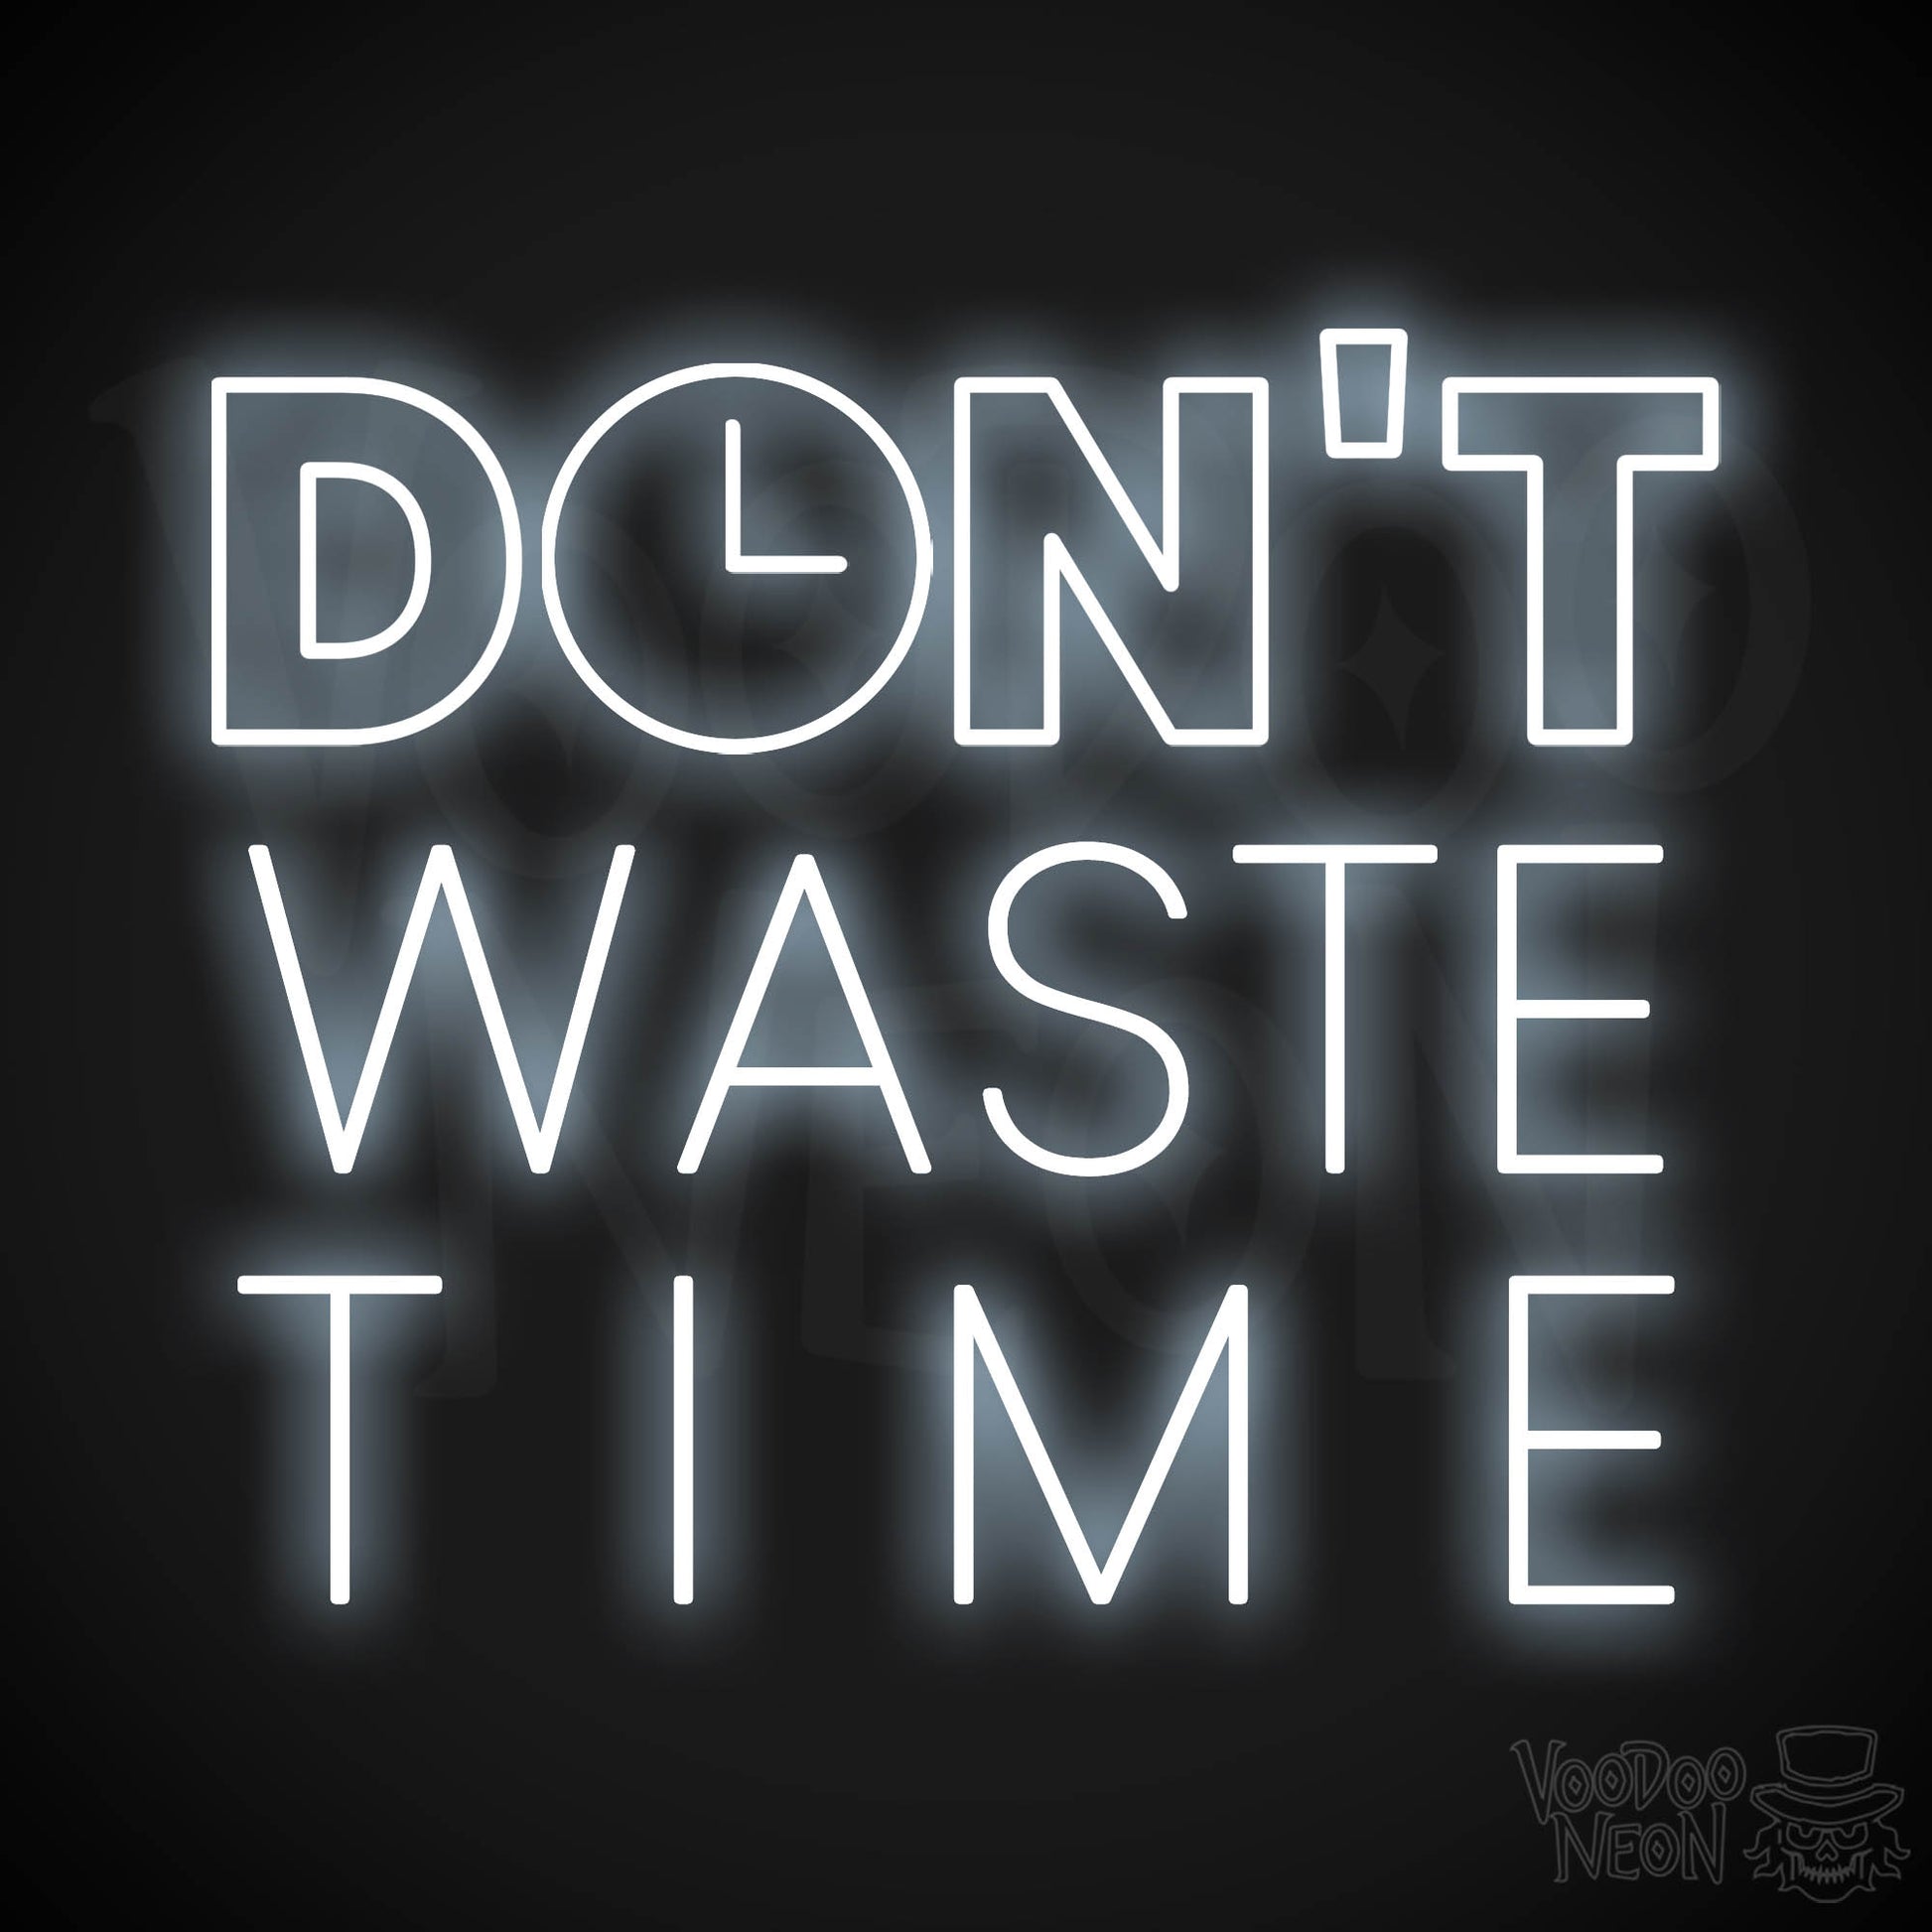 Don't Waste Time LED Neon - Cool White